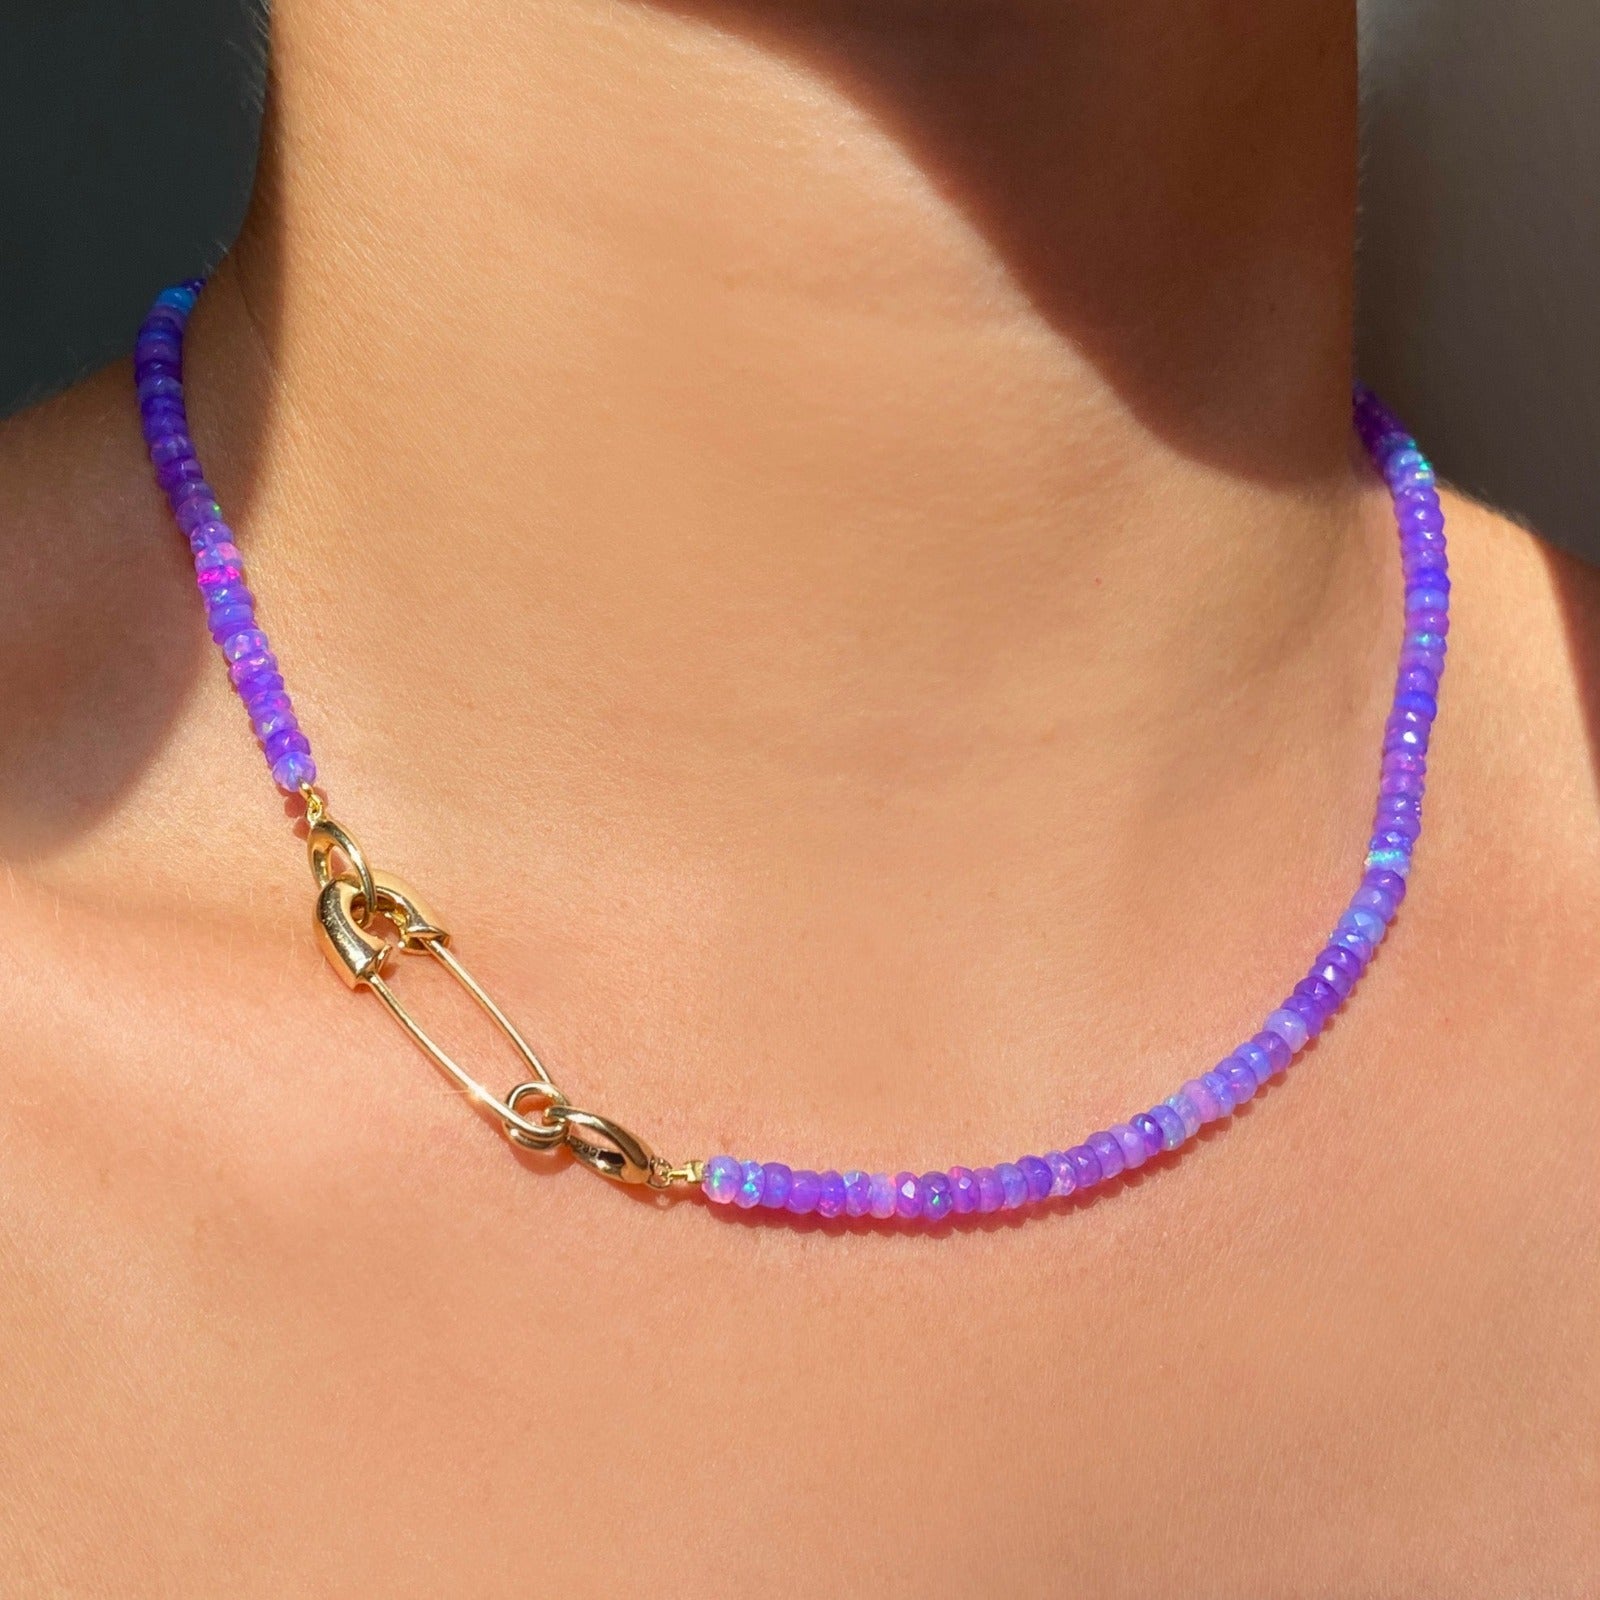 Shimmering beaded necklace made of faceted opals in shades of violet purple on a gold linking ovals clasp. Styled on a neck with a safety pin charm lock.